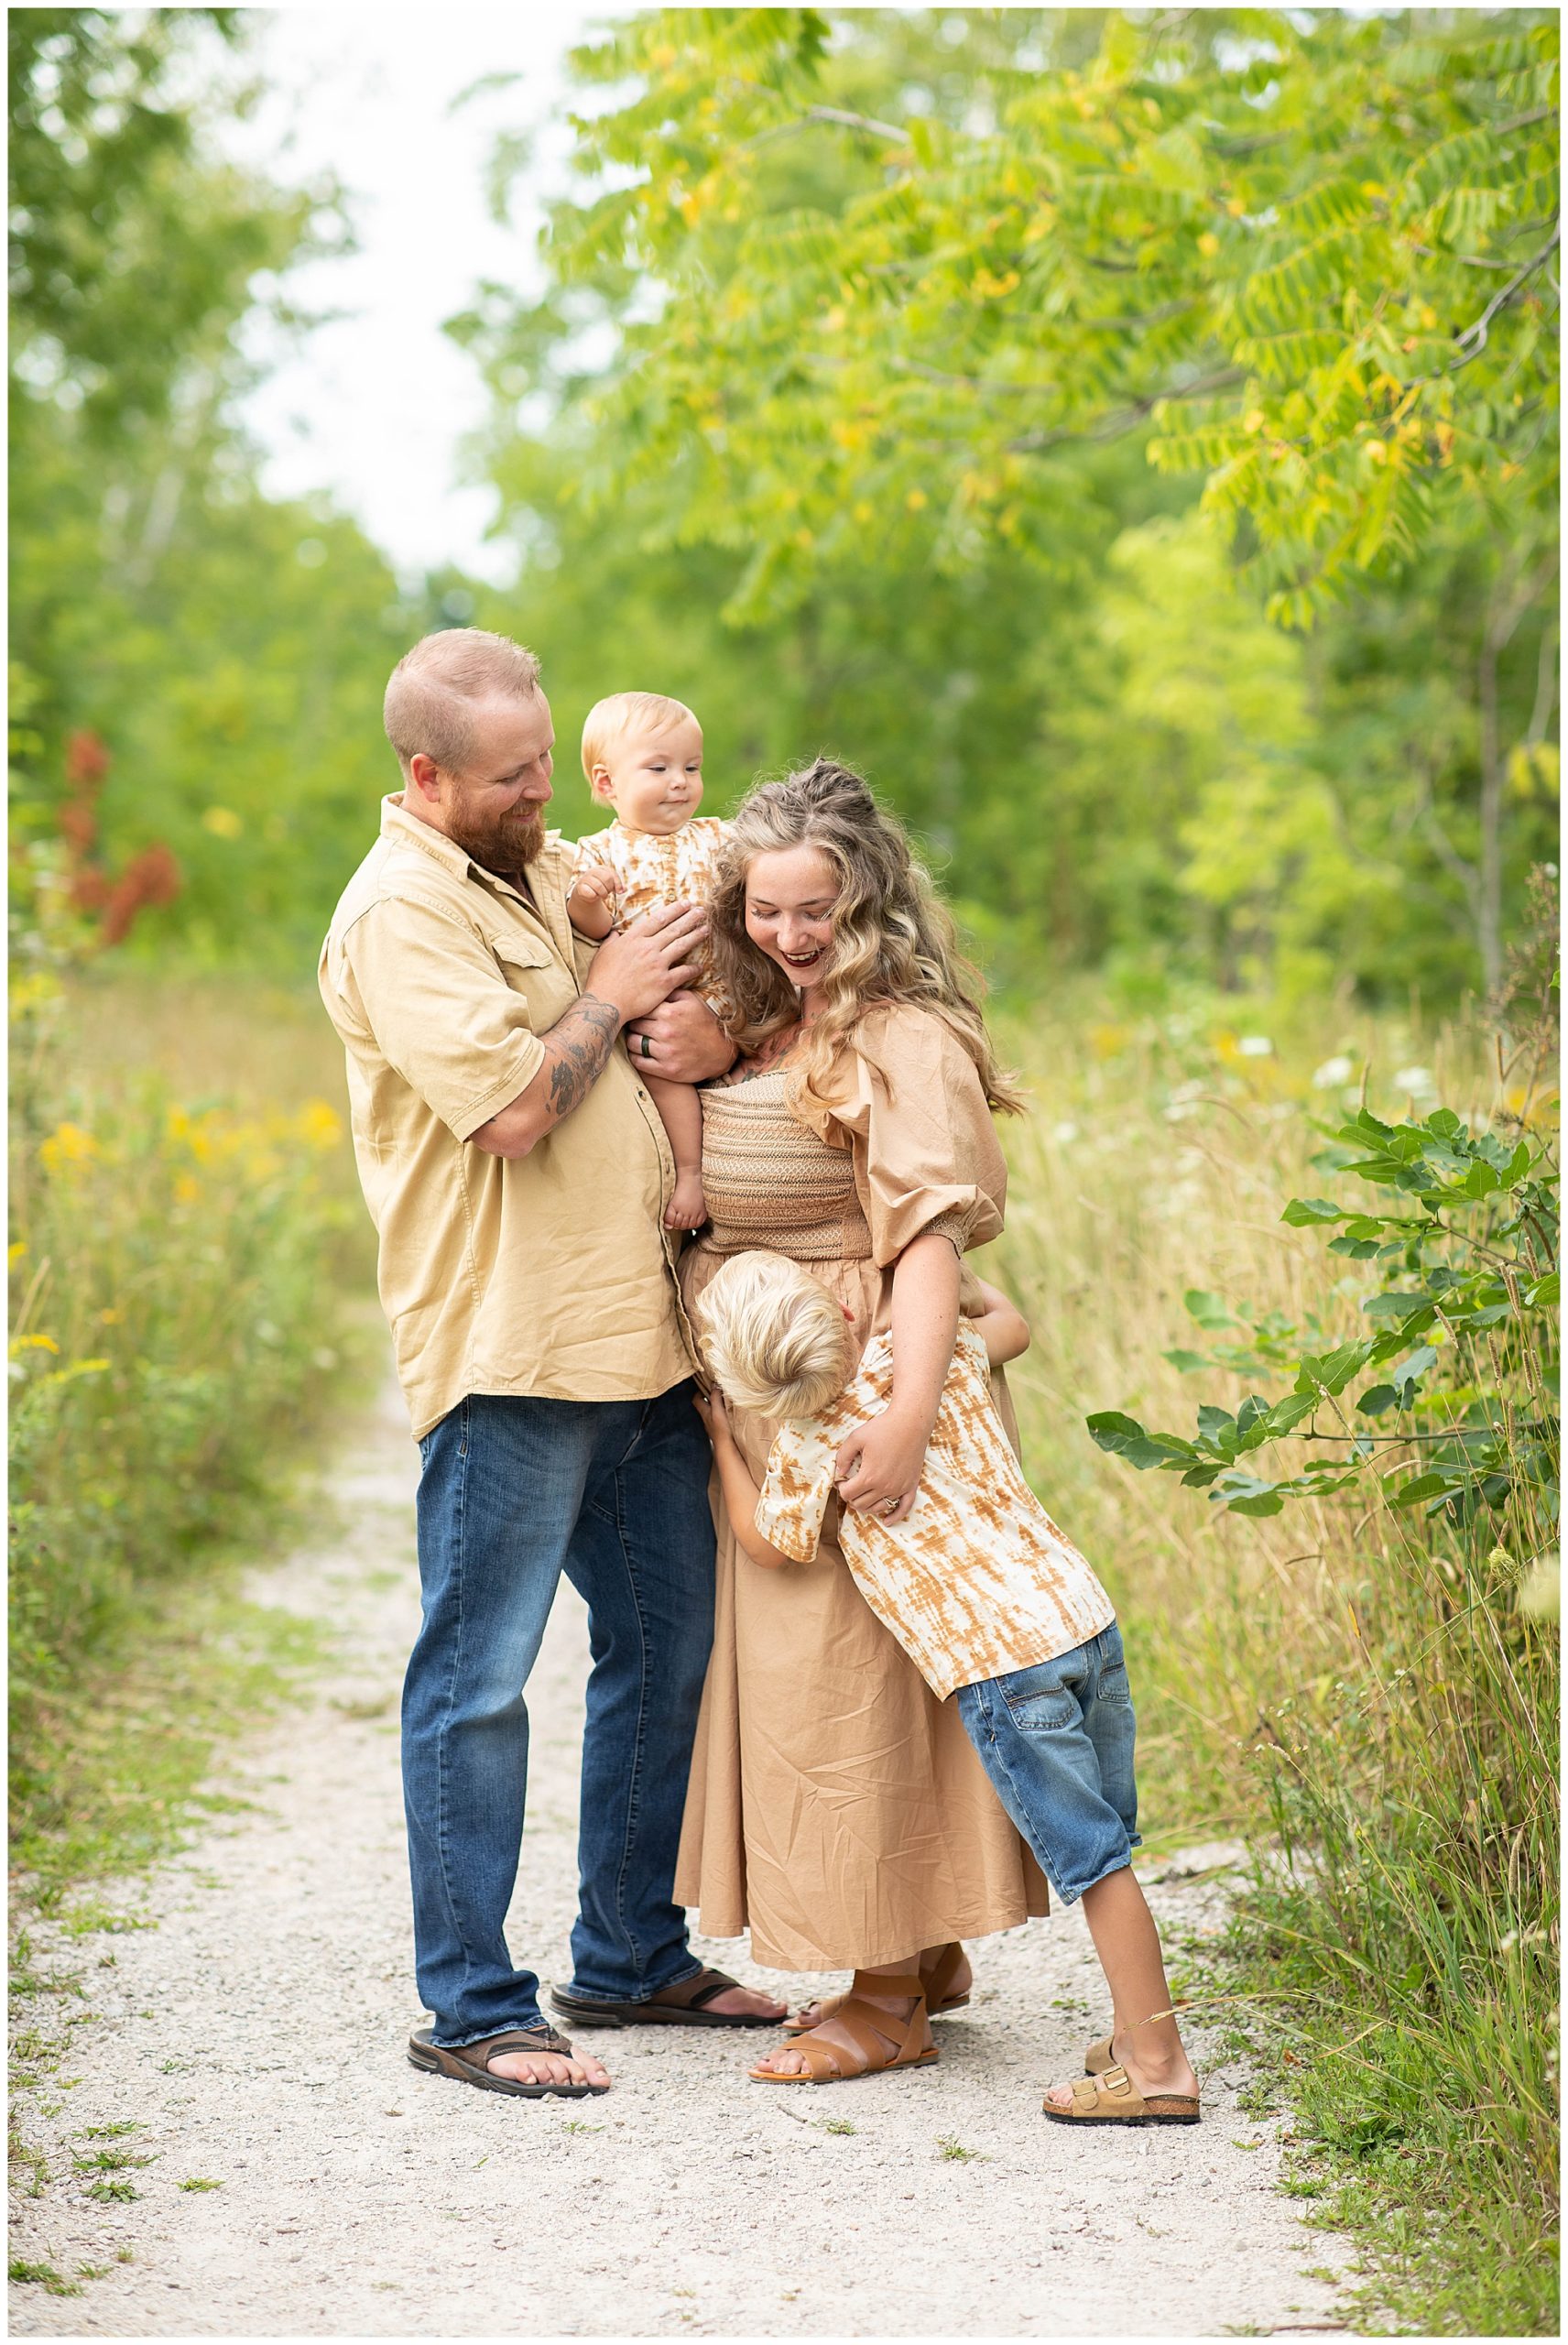 neutral color family photo outfits
